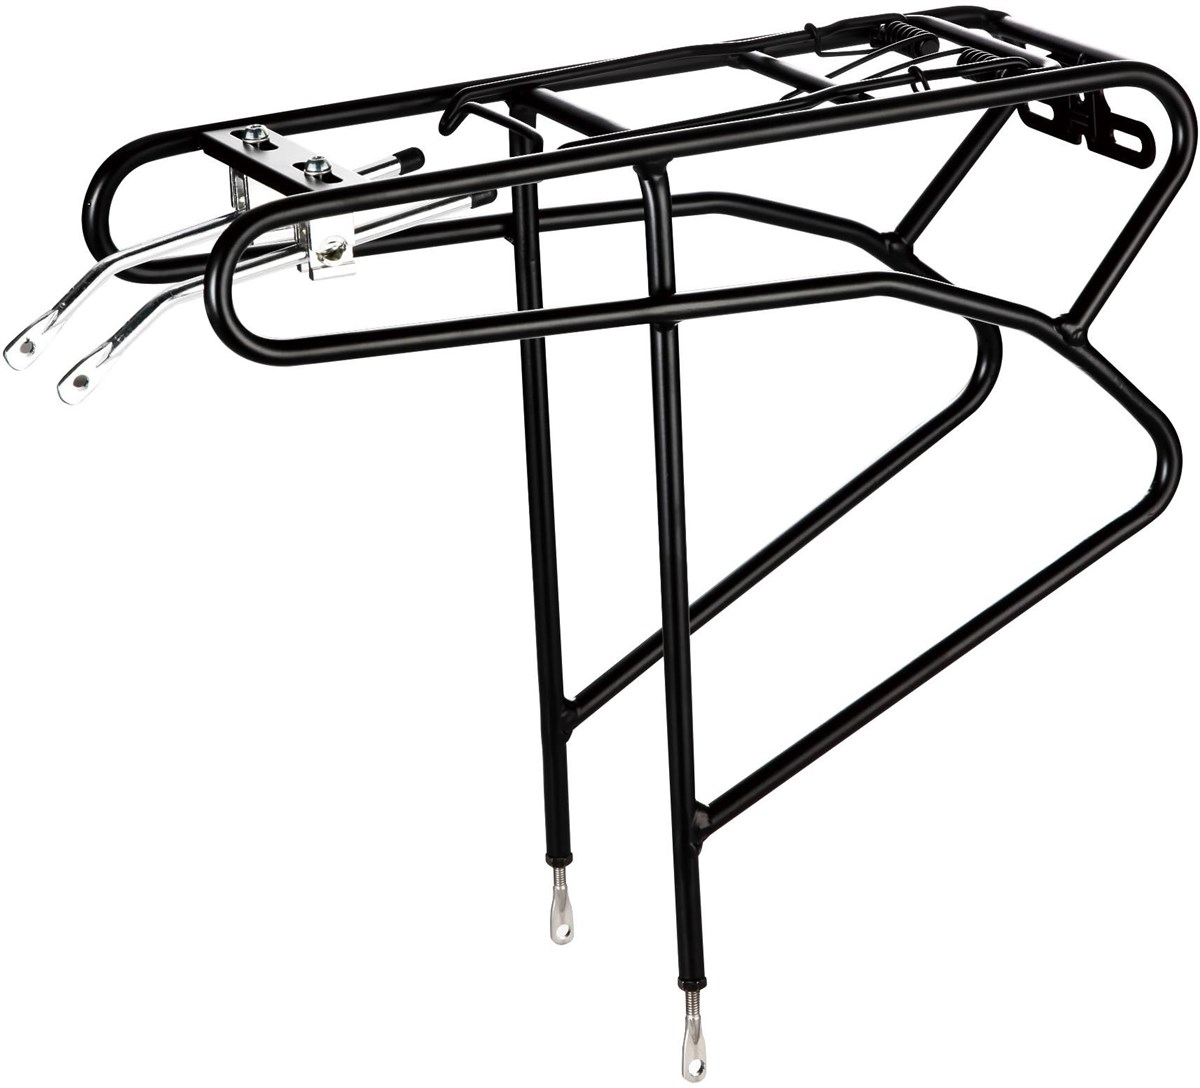 Oxford 26/28 inch Adjustable Rear Rack Carrier product image